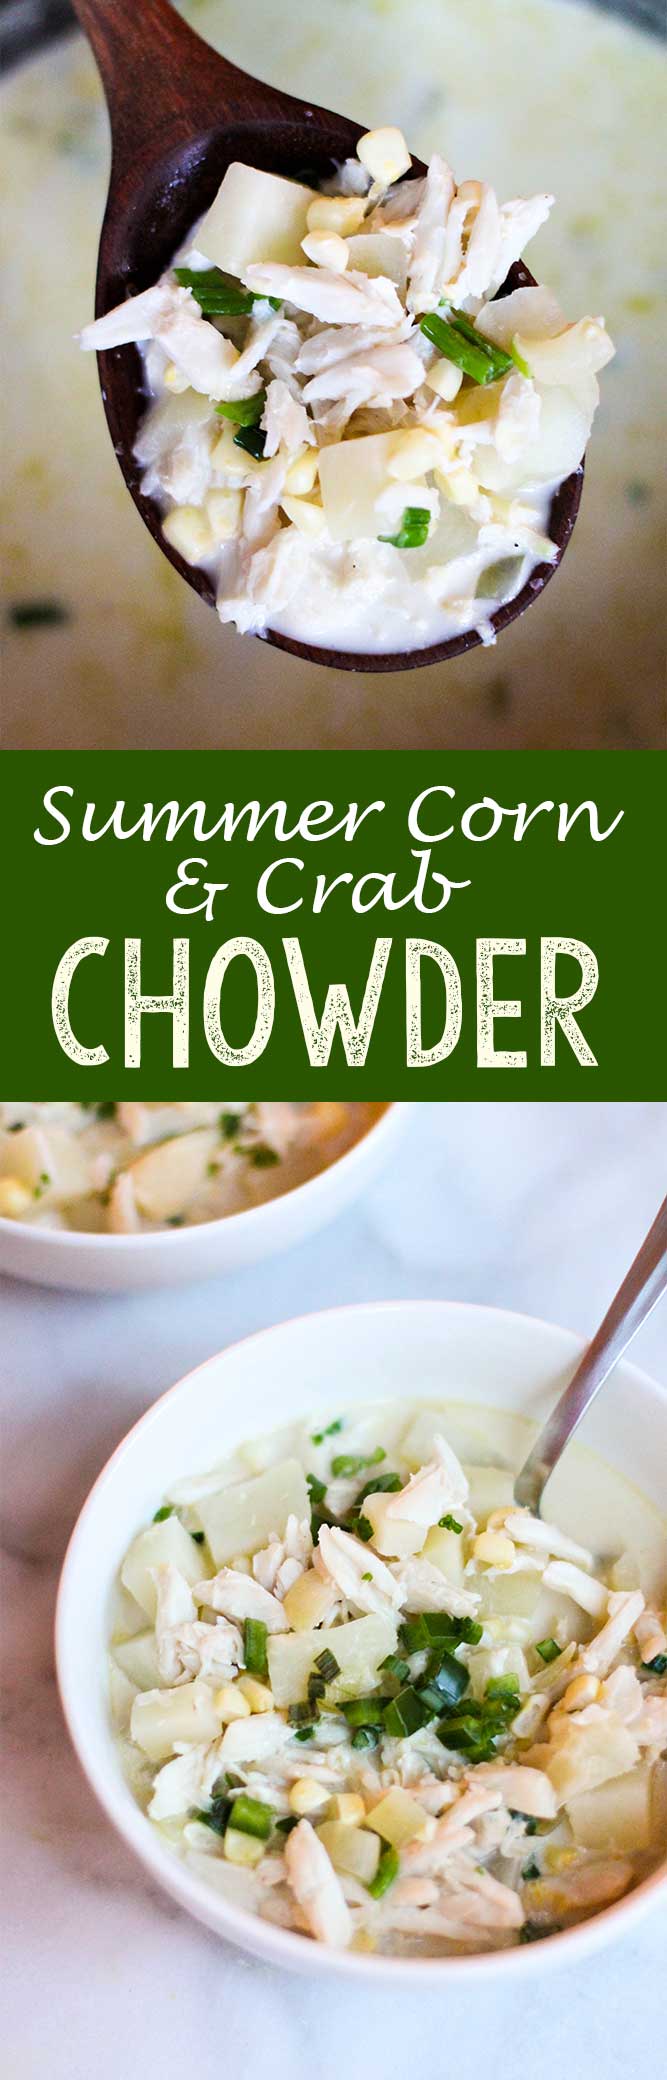 Summer corn and crab chowder is the perfect summer soup for a nice evening eating alfresco